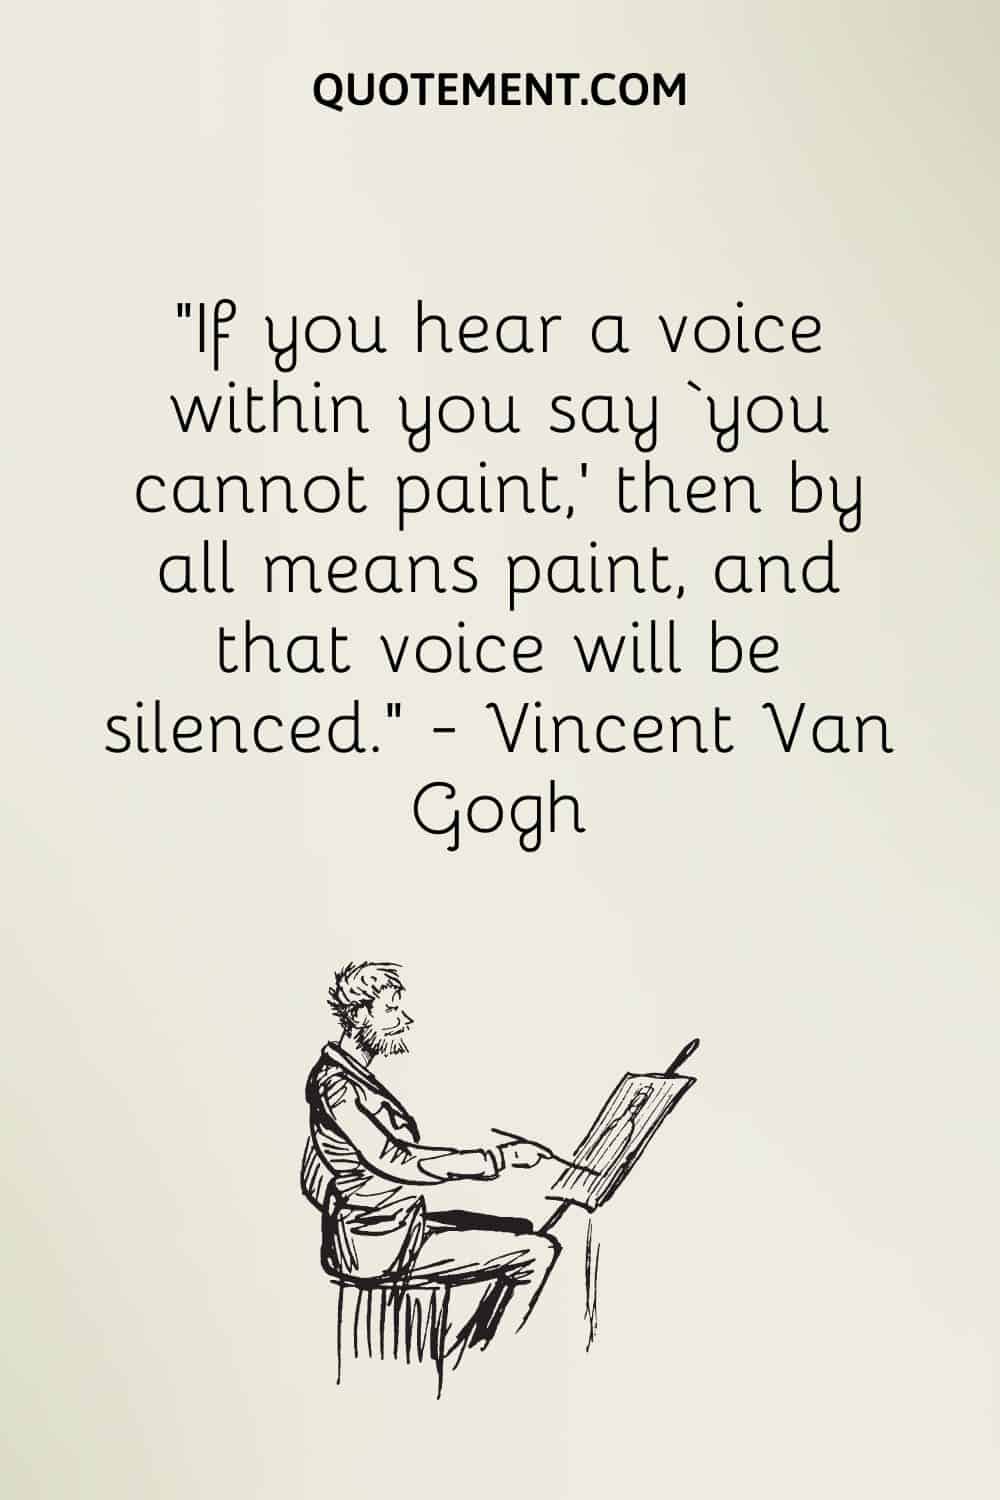 If you hear a voice within you say ‘you cannot paint,’ then by all means paint, and that voice will be silenced